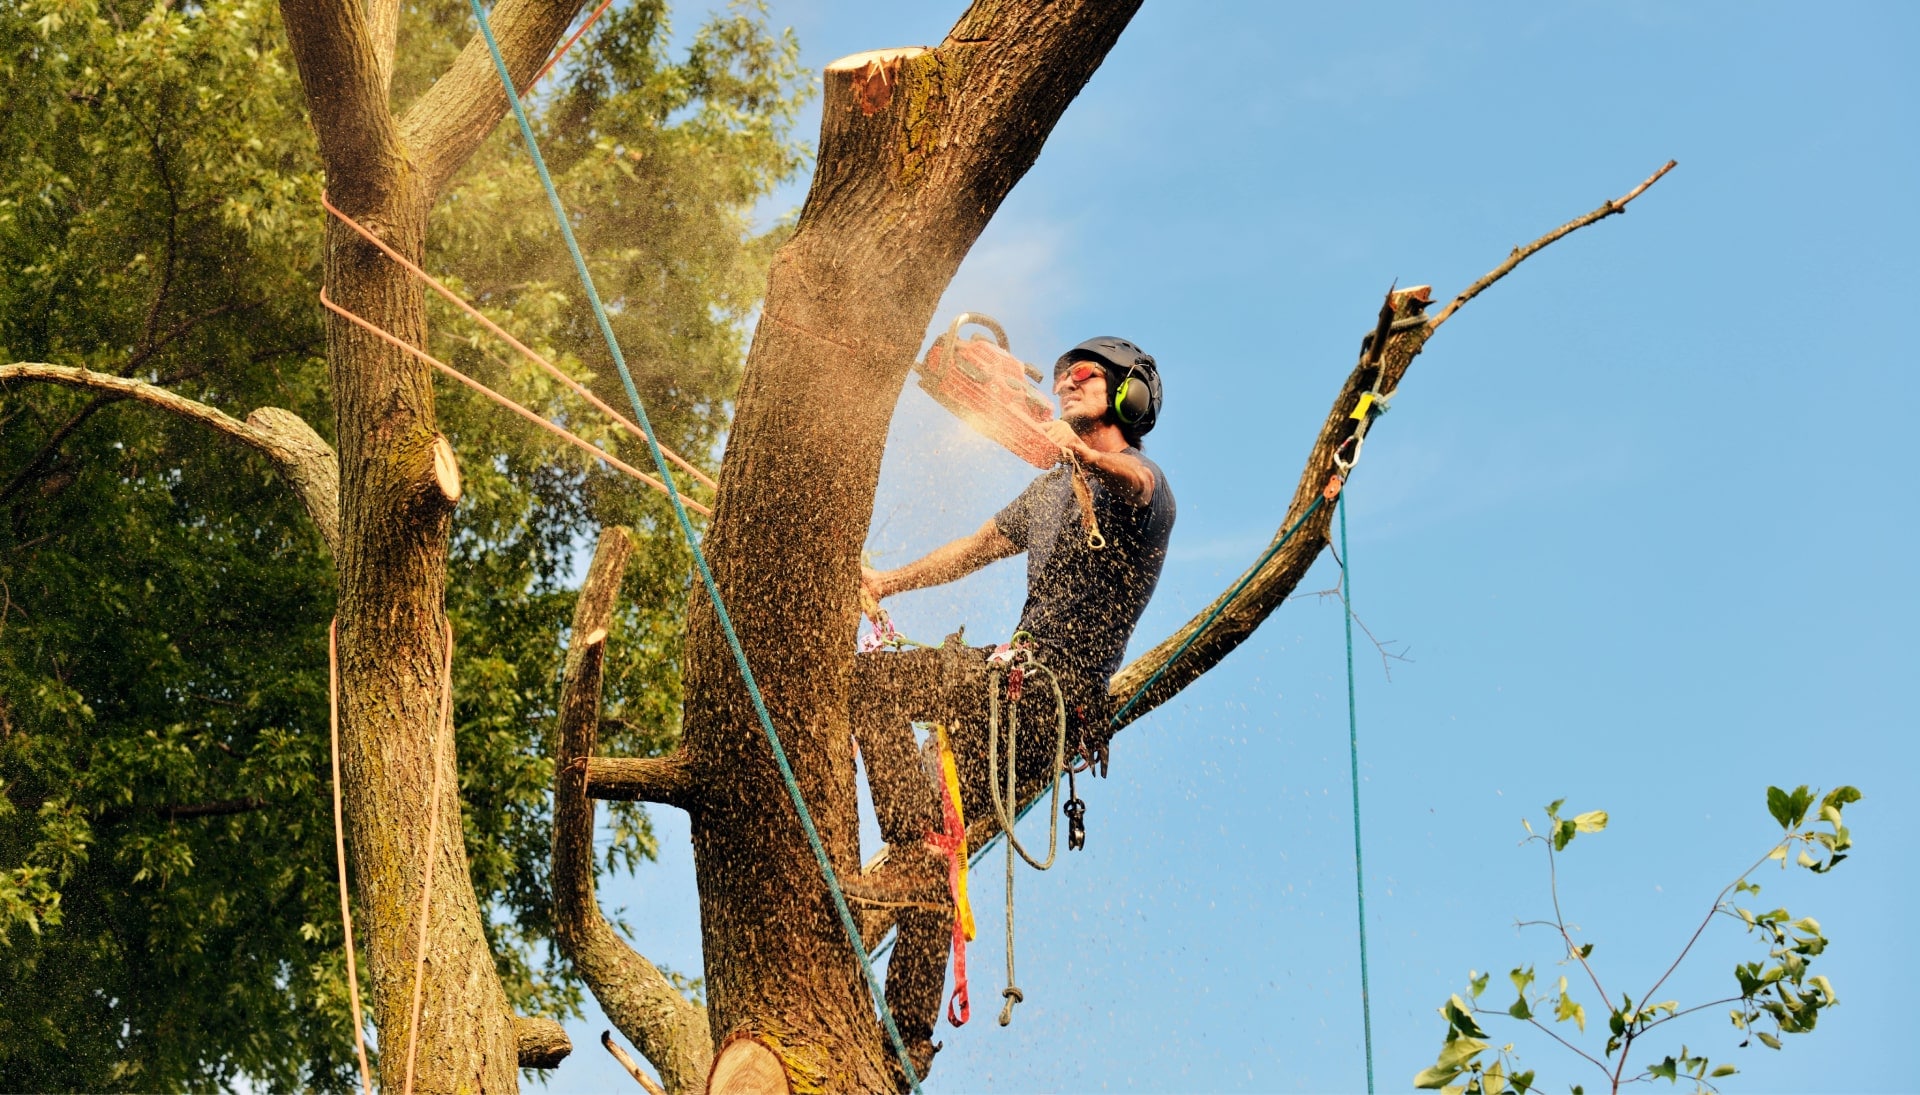 Lubbock tree removal experts solve tree issues.